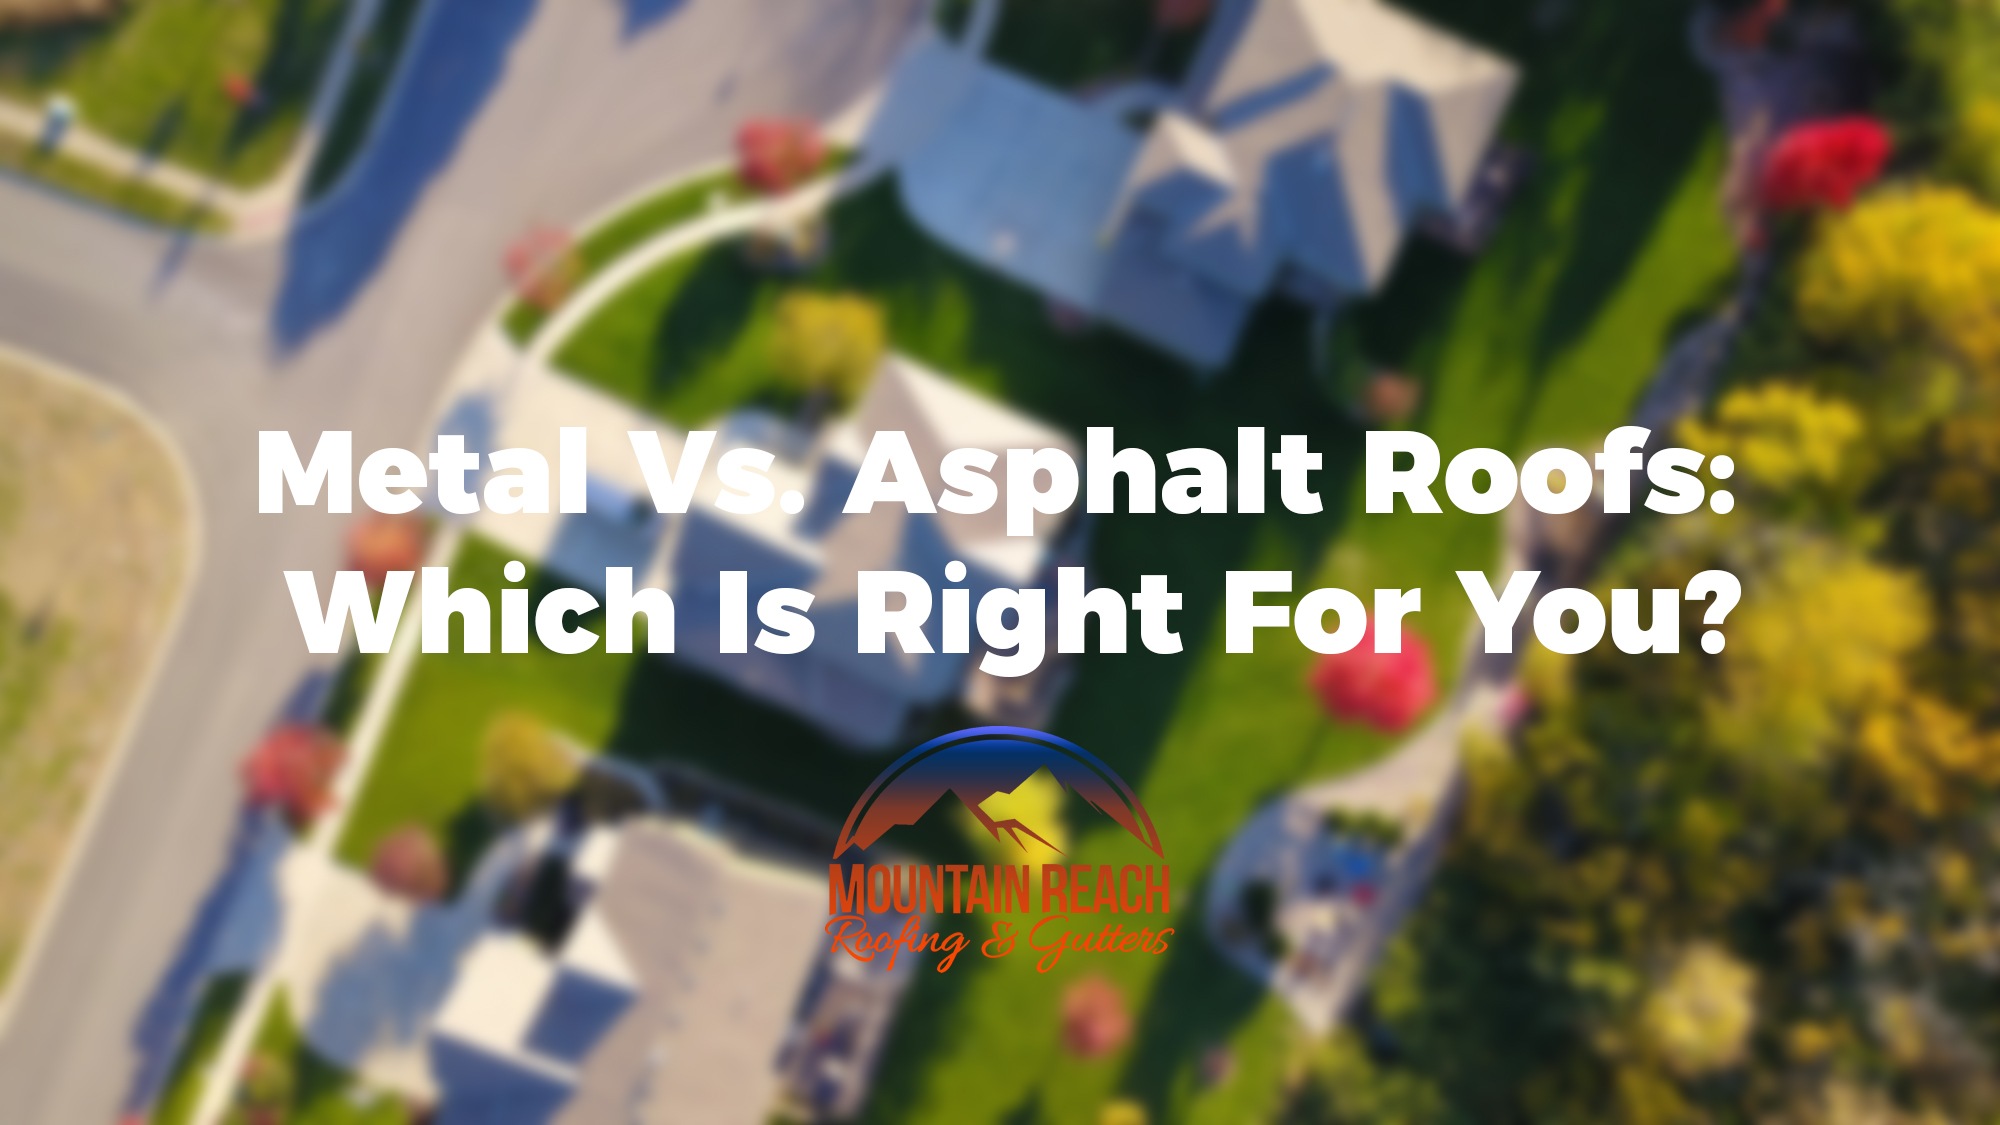 Metal Vs. Asphalt Roofs: Which Is Right For You?